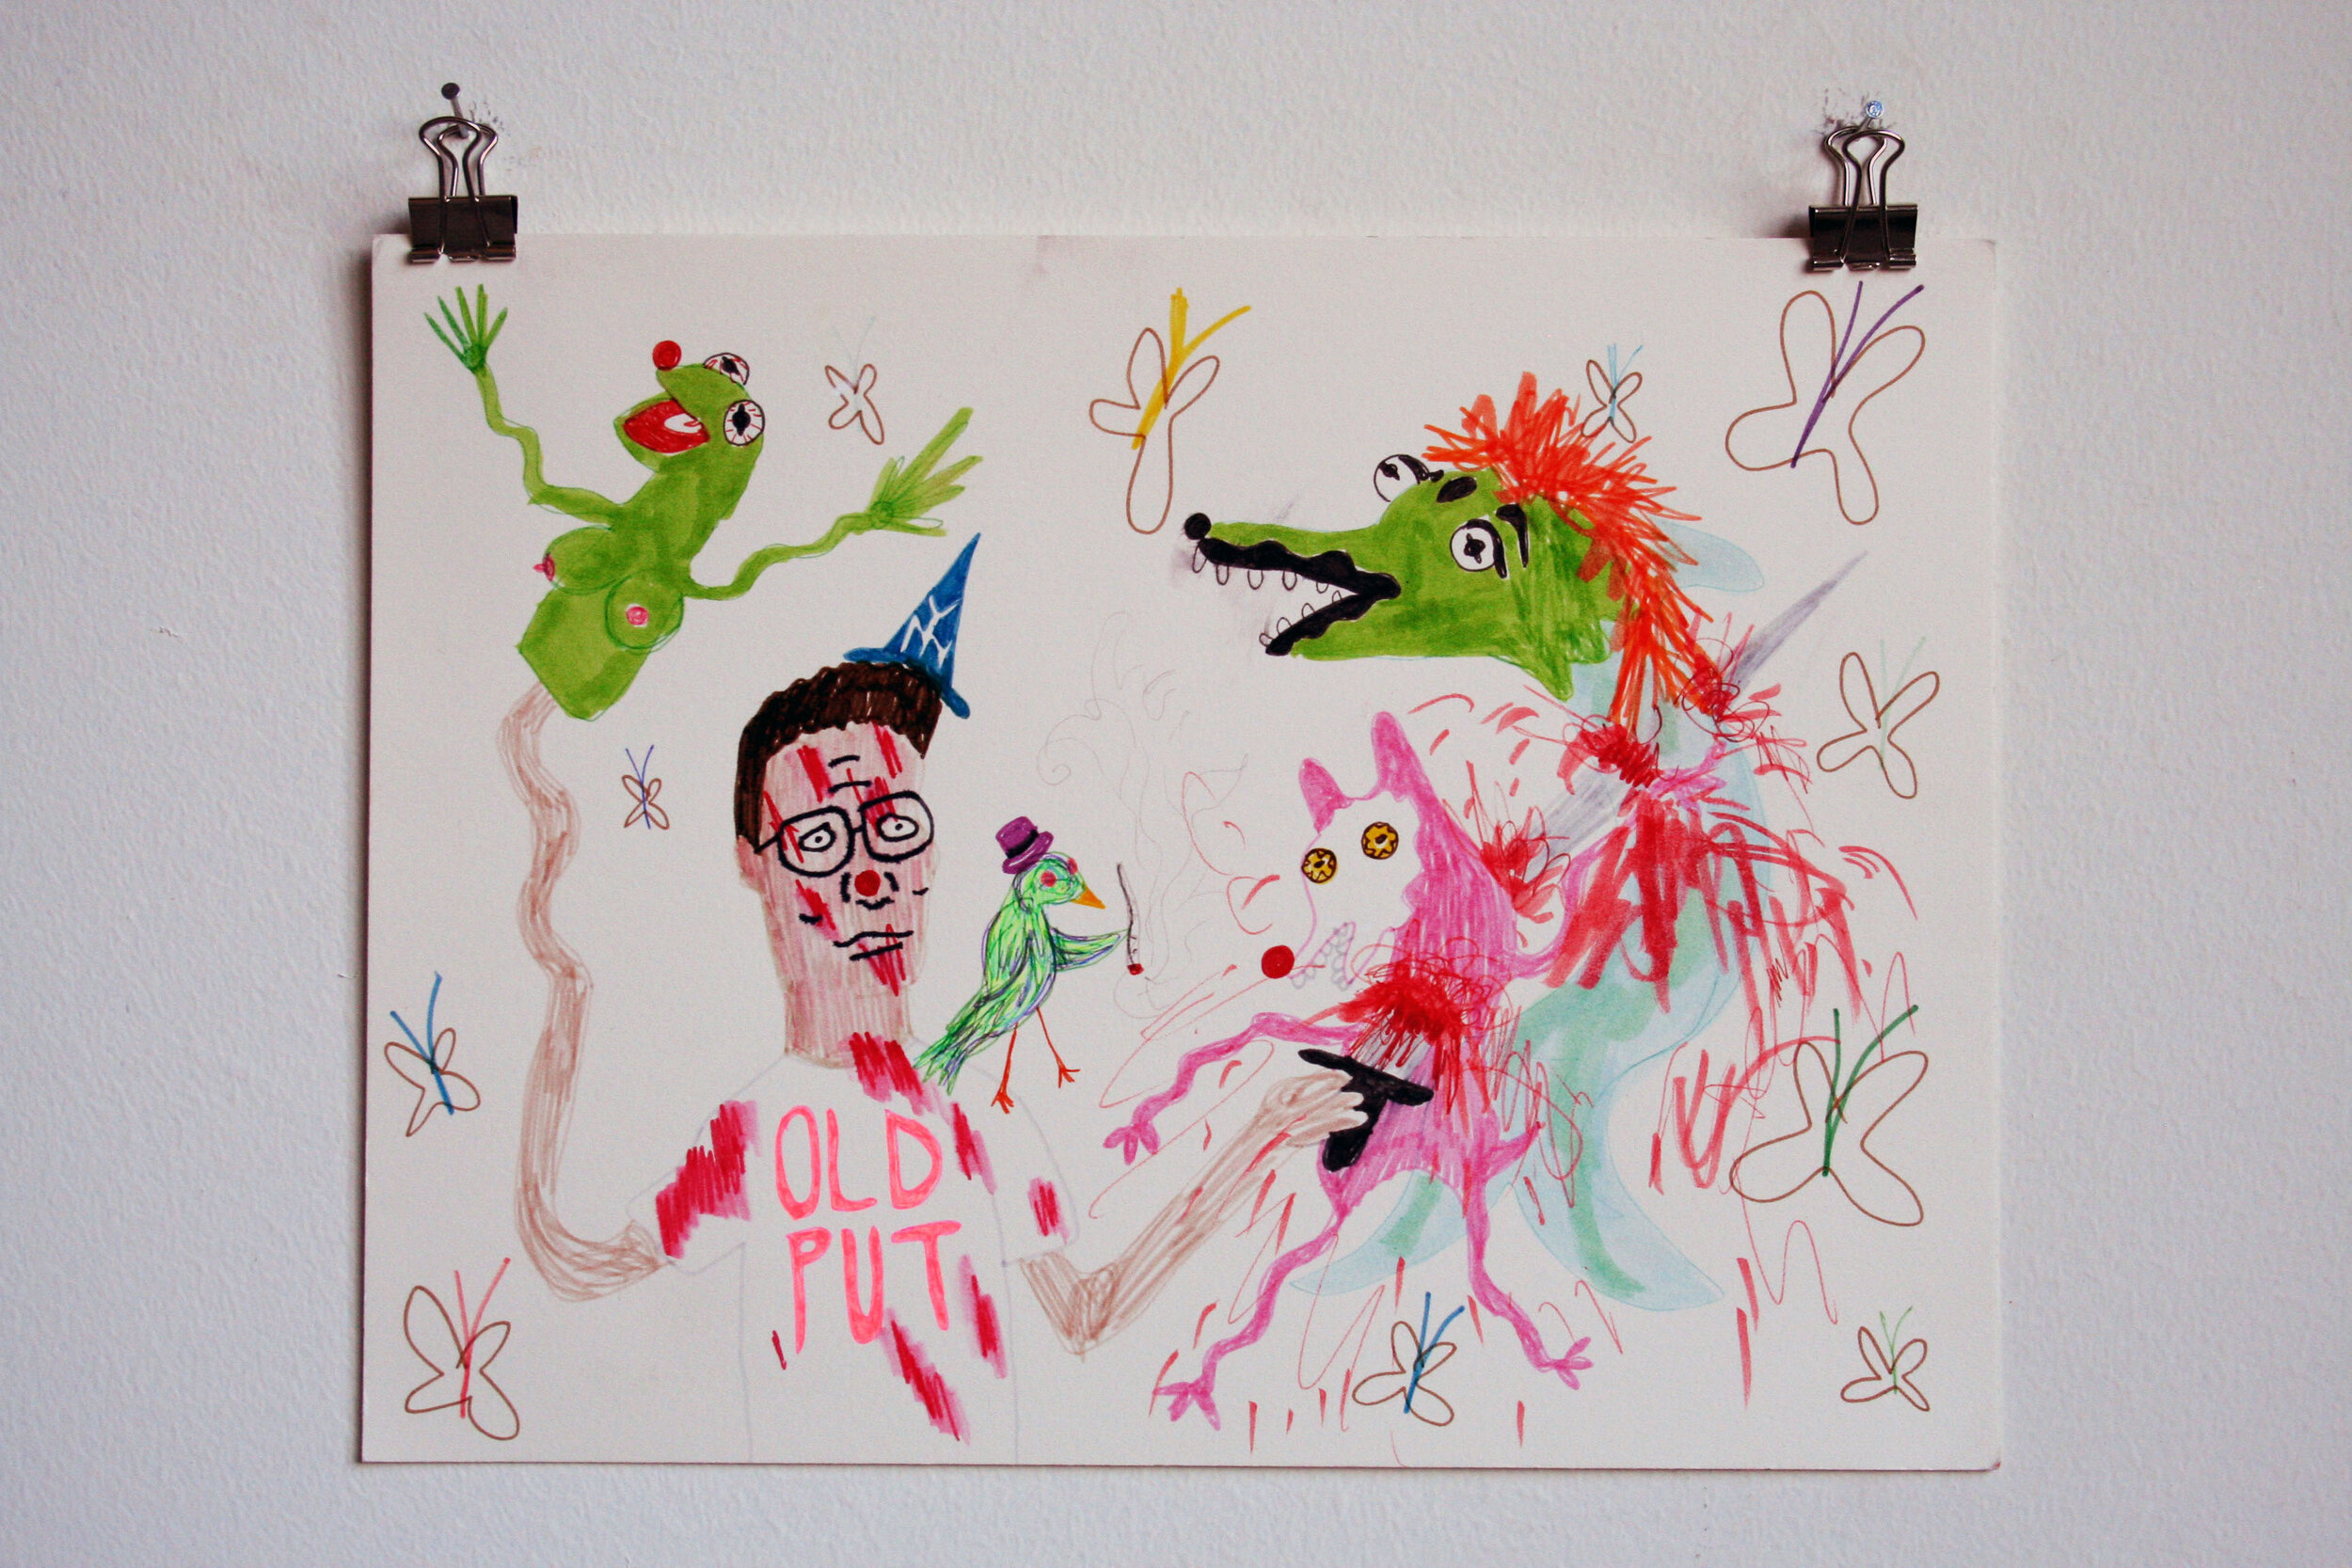   Hank Experiments with Puppets , 2015  9 x 12 inches (22.86 x 30.48 cm.)  Marker on paper 